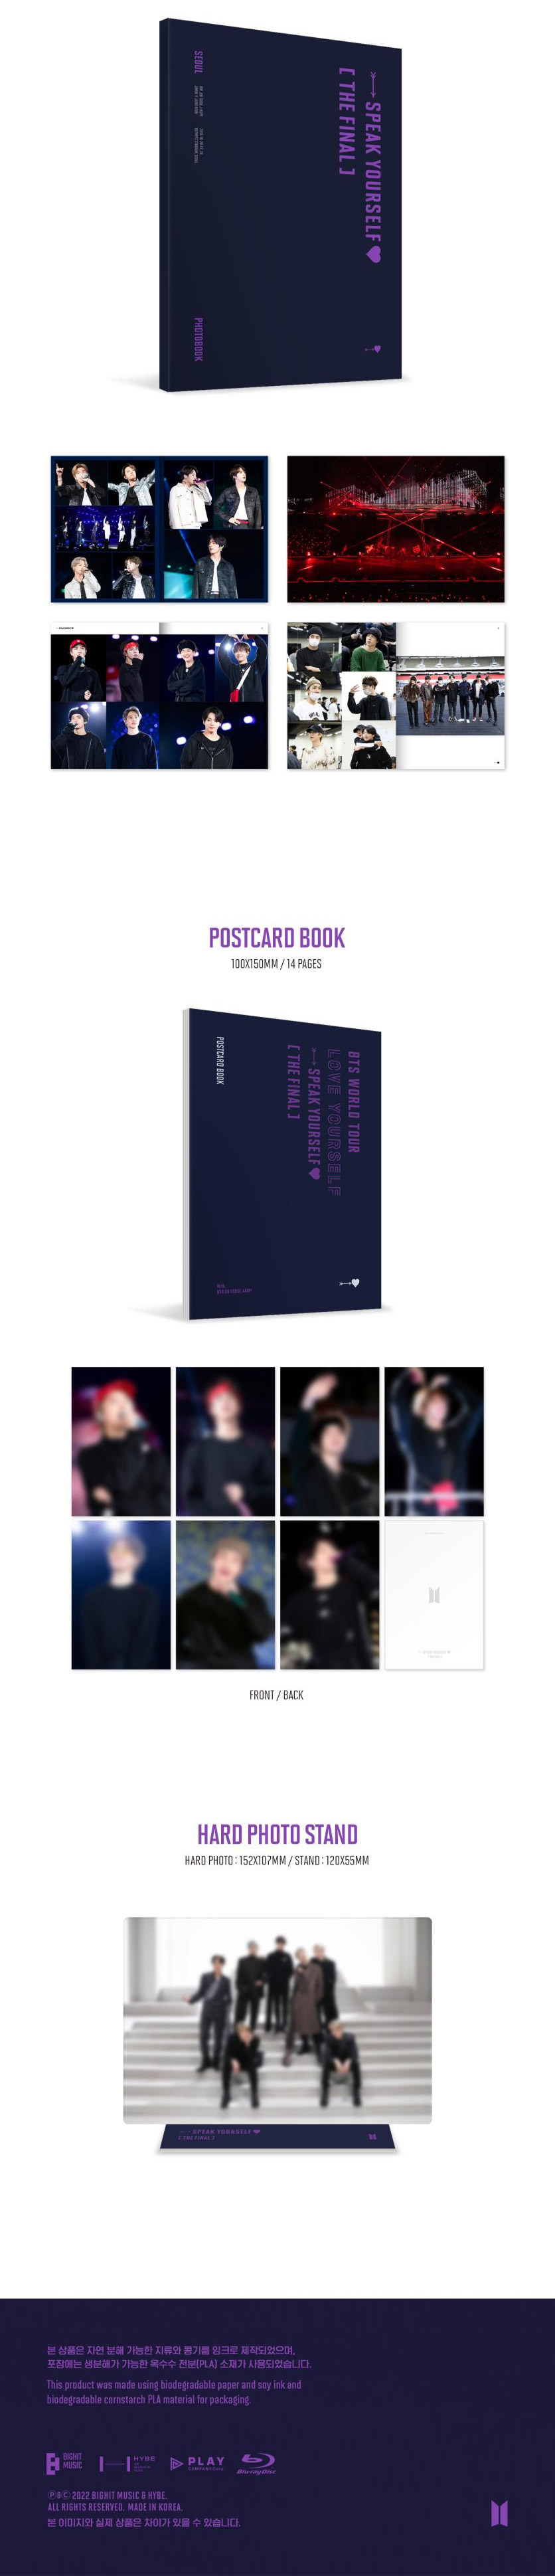 BTS WORLD TOUR 'LOVE YOURSELF : SPEAK YOURSELF' [THE FINAL] Blu-ray